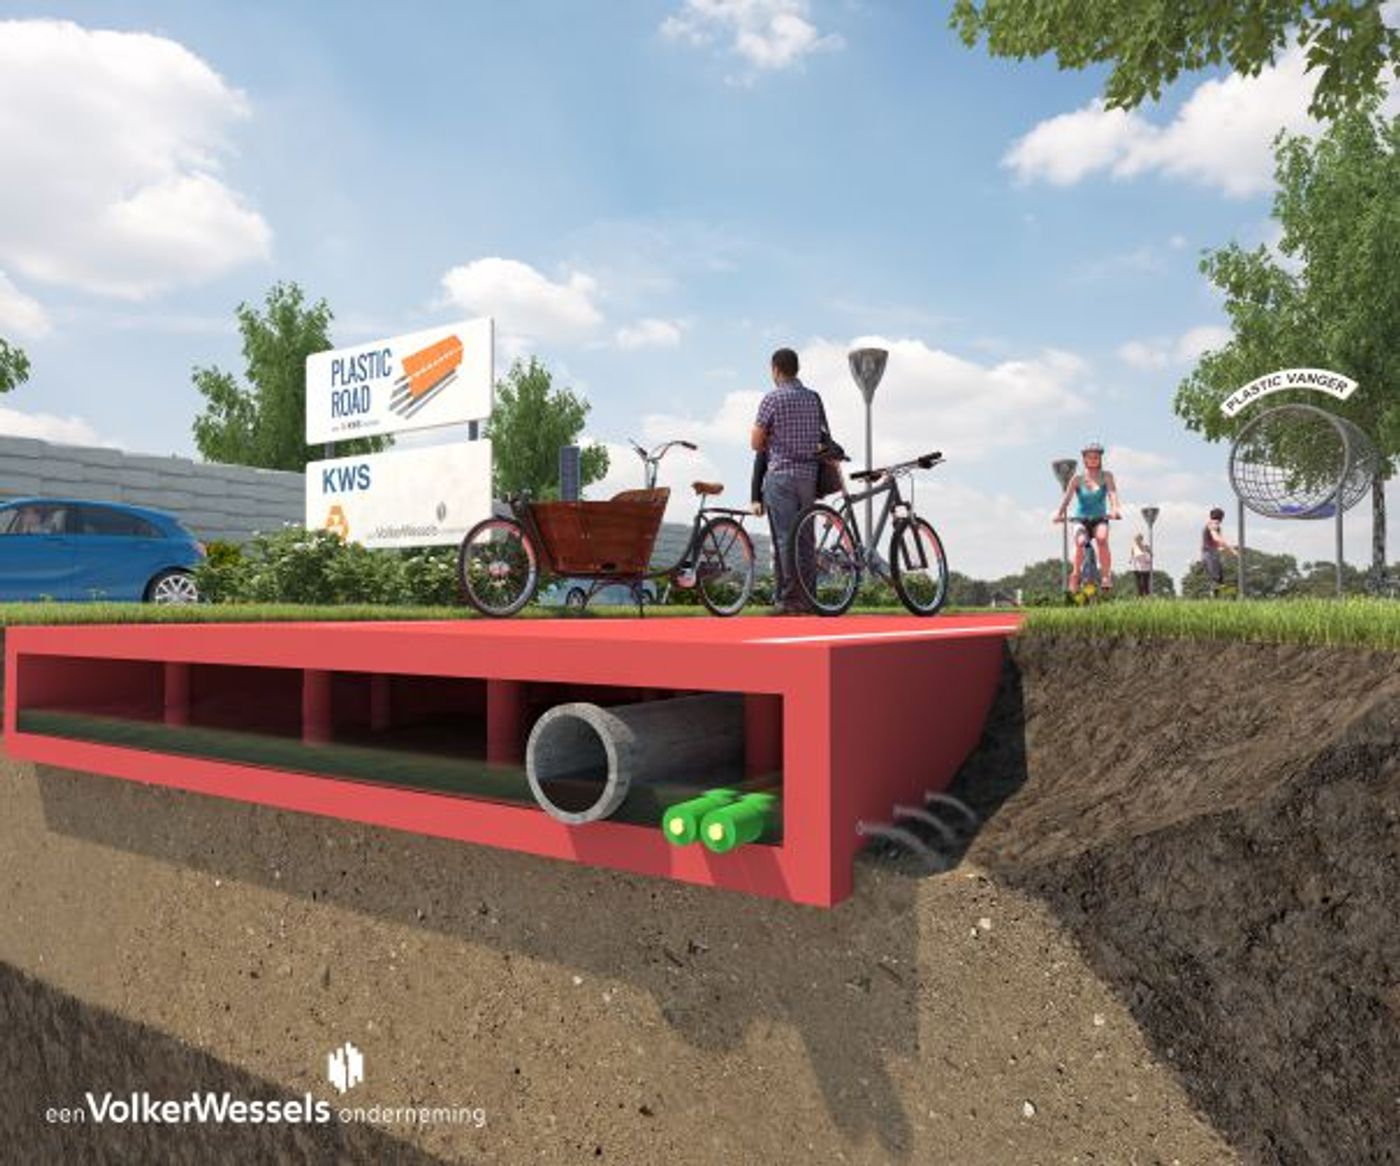 A prototype design of what a plastic road would look like. Photo: VolkerWessels